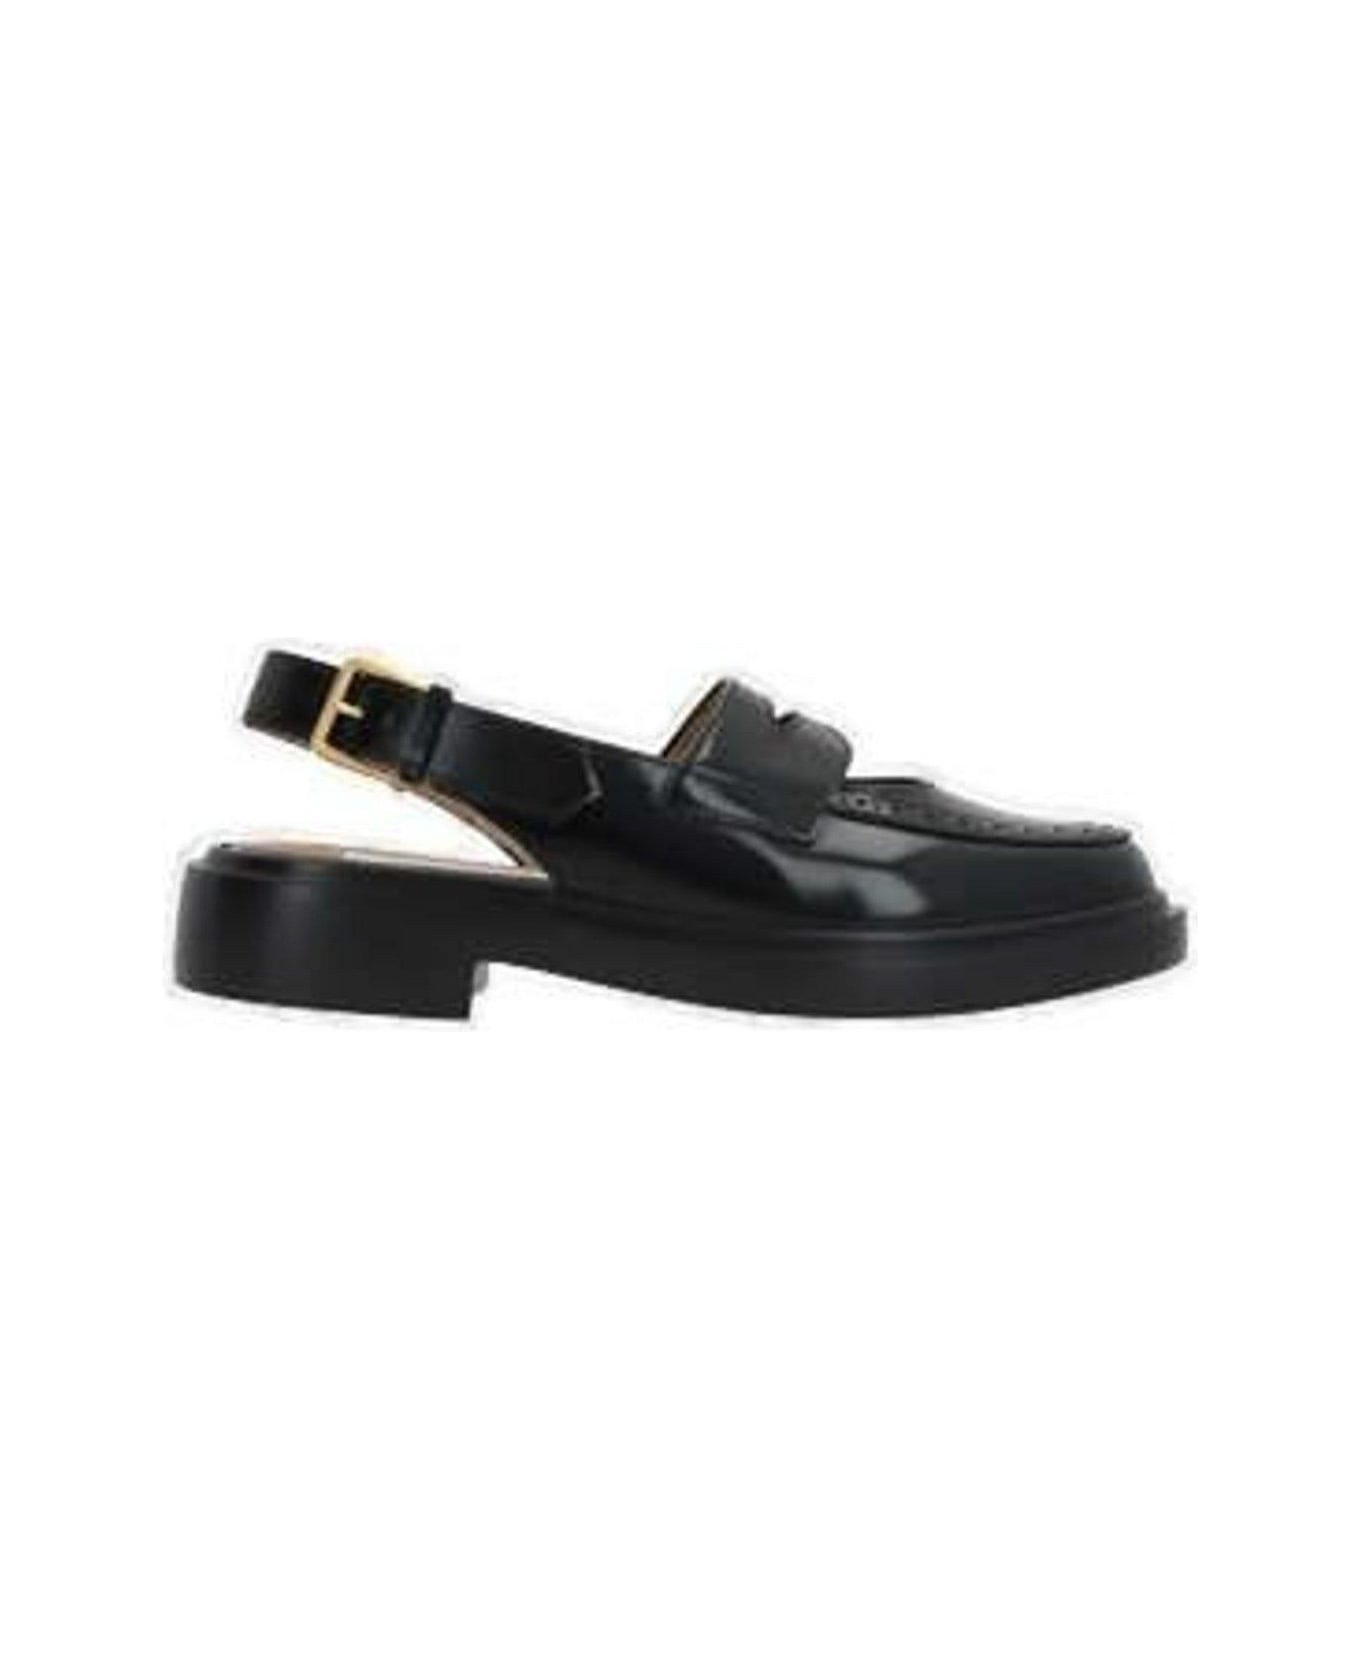 Thom Browne Cut Out Detailed Slingback Penny Loafers - Black